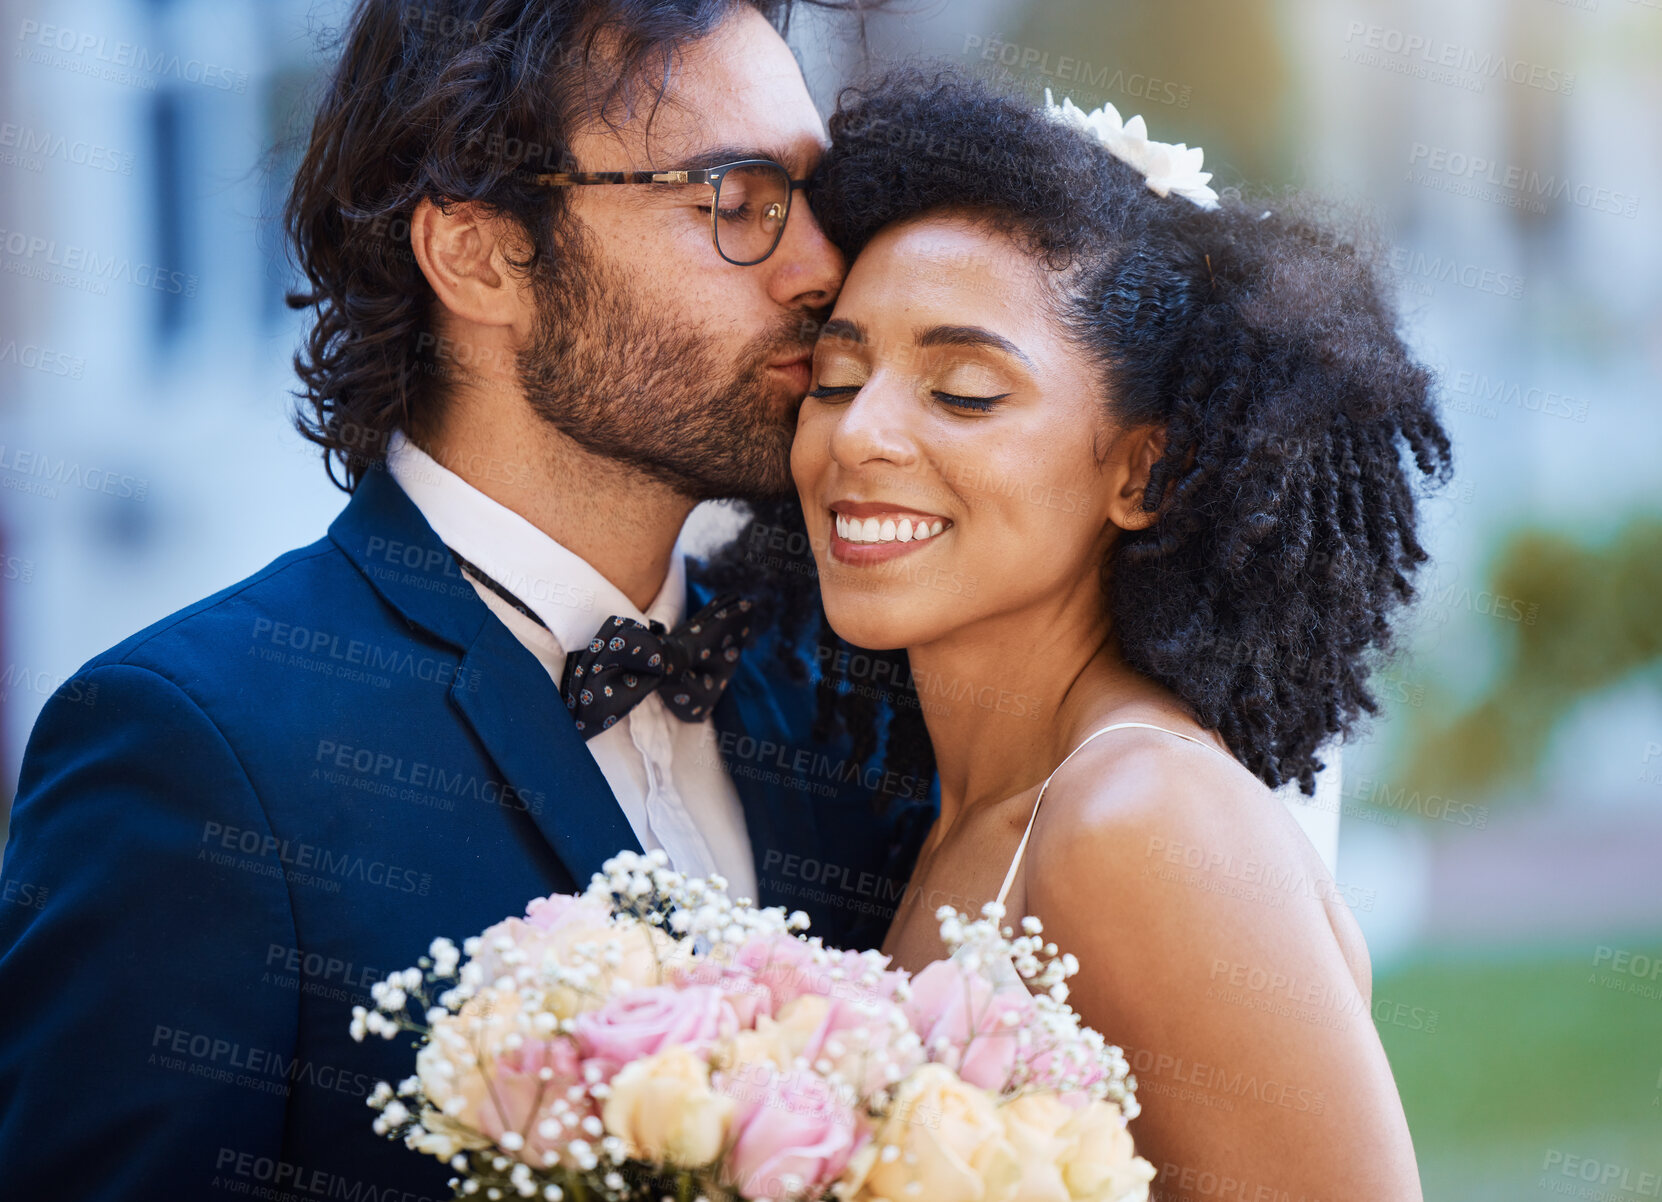 Buy stock photo Care, kiss and couple at wedding happy with romantic outdoor marriage event celebration with flowers. Partnership, commitment and trust embrace of interracial bride and groom with excited smile.